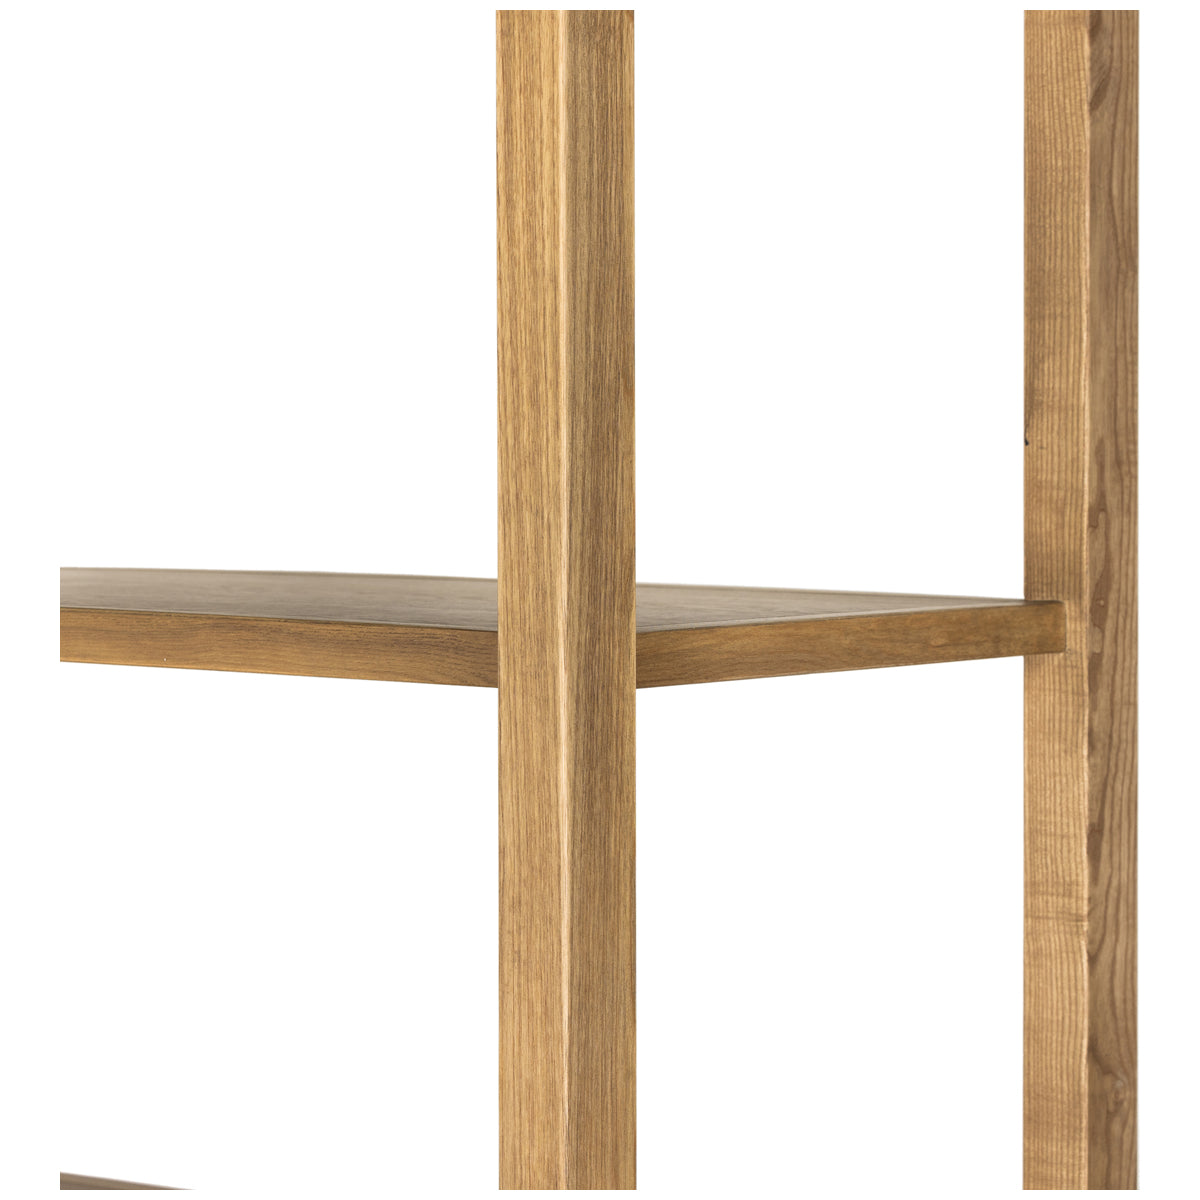 Four Hands Westgate Roswell Bookcase - Toasted Ash Solid